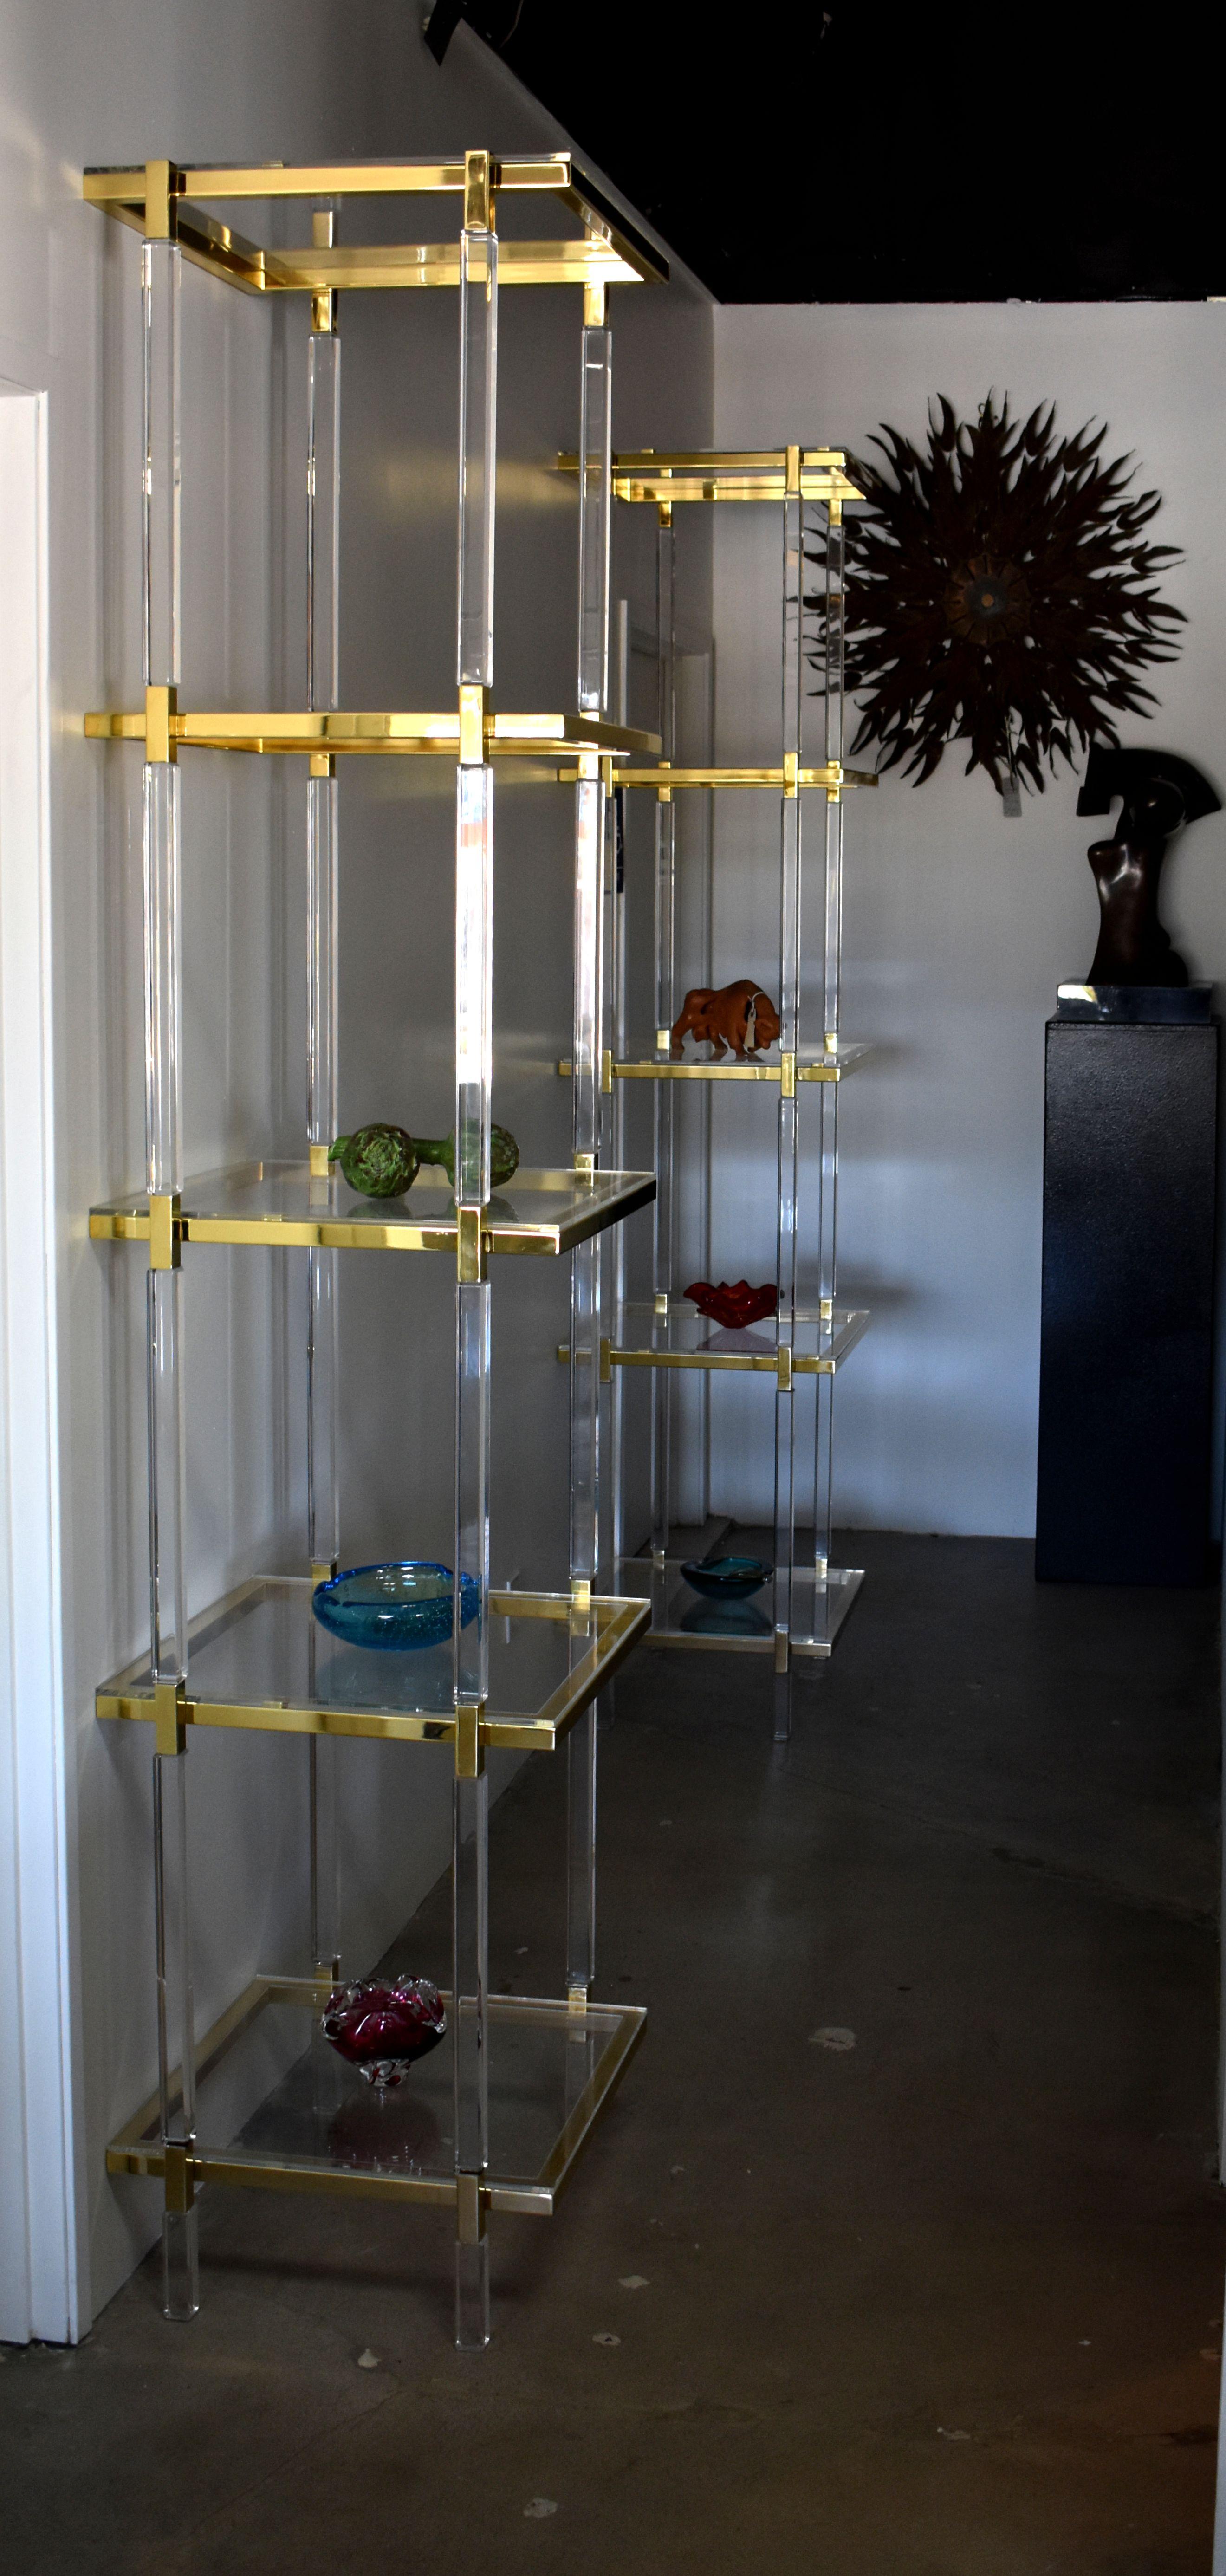 Pair of brass plated and lucite custom shelving display design and signed by Charles Hollis Jones
Each shelf is made of lucite.

Provenance directly from CHJ.

About Charles Hollis Jones:

Charles Hollis Jones is an American artist and furniture